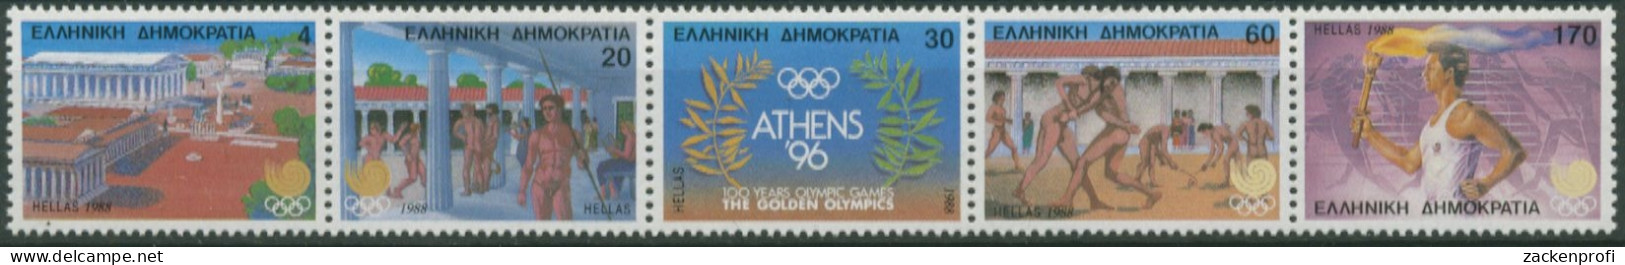 Griechenland 1988 Olympiade Seoul, Athen 1687/91 ZD Postfrisch (C30865) - Unused Stamps